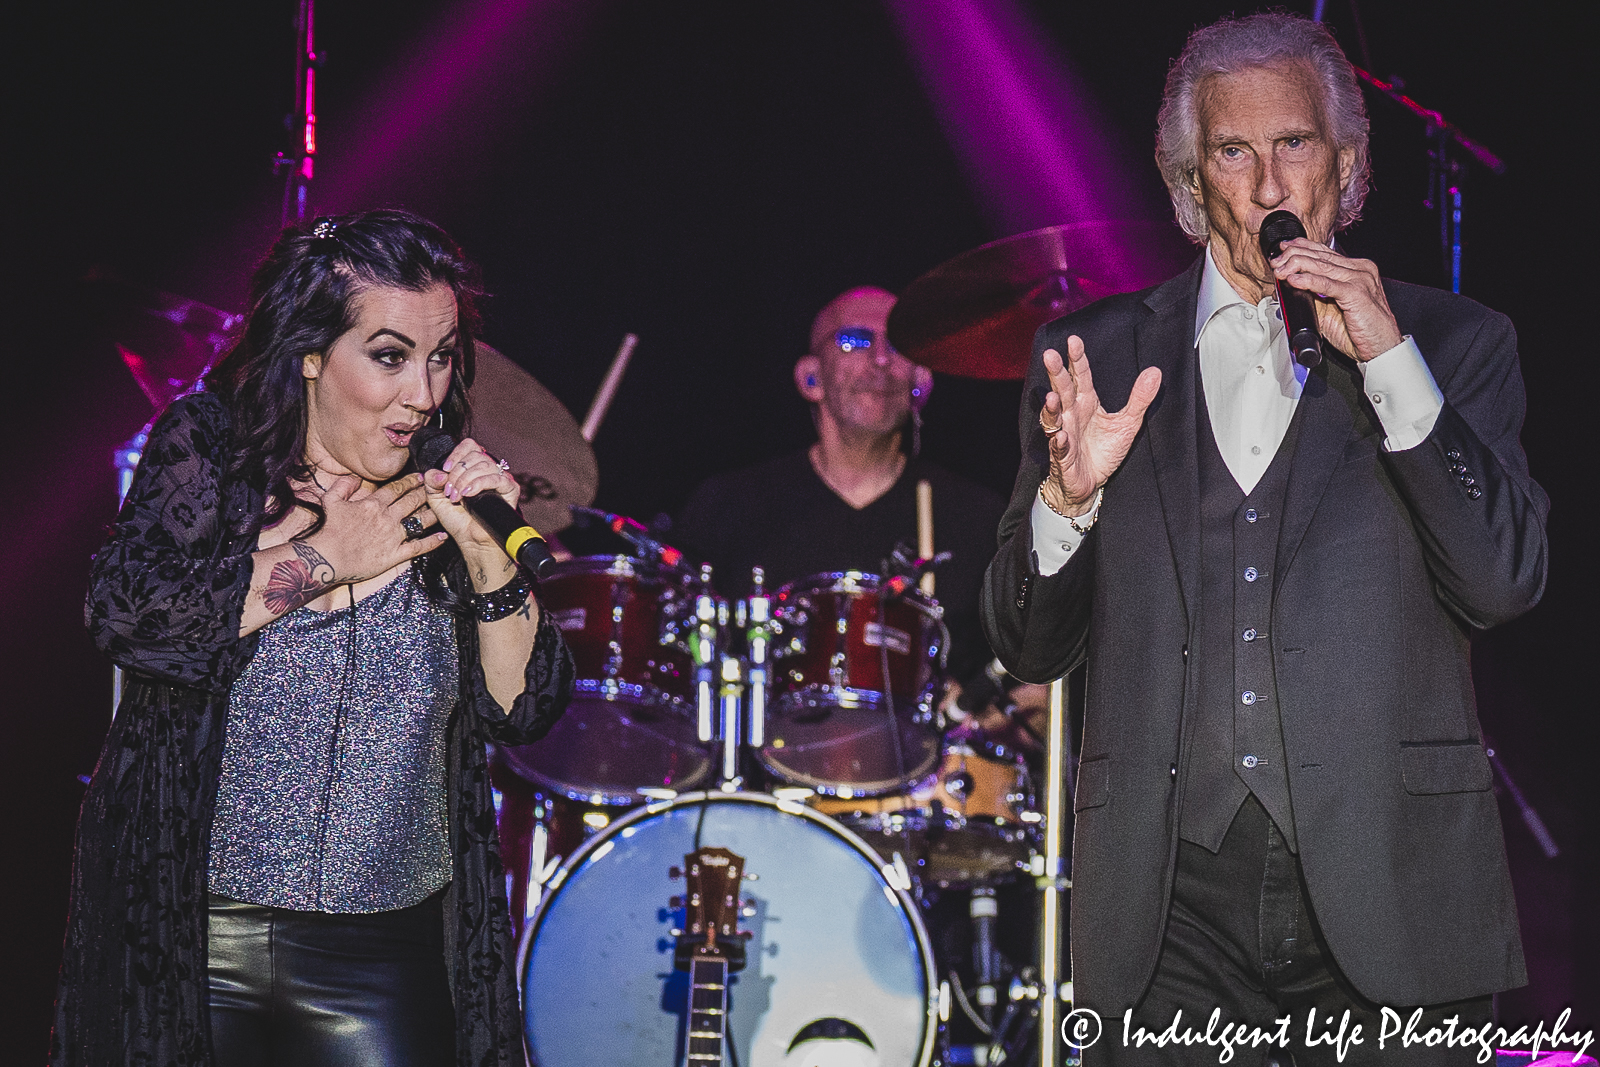 Bill Medley singing "(I've Had) The Time of My Life" from the "Dirty Dancing" soundtrack with Stephanie Calvert at Prairie Band Casino in Mayetta, KS on June 29, 2023.